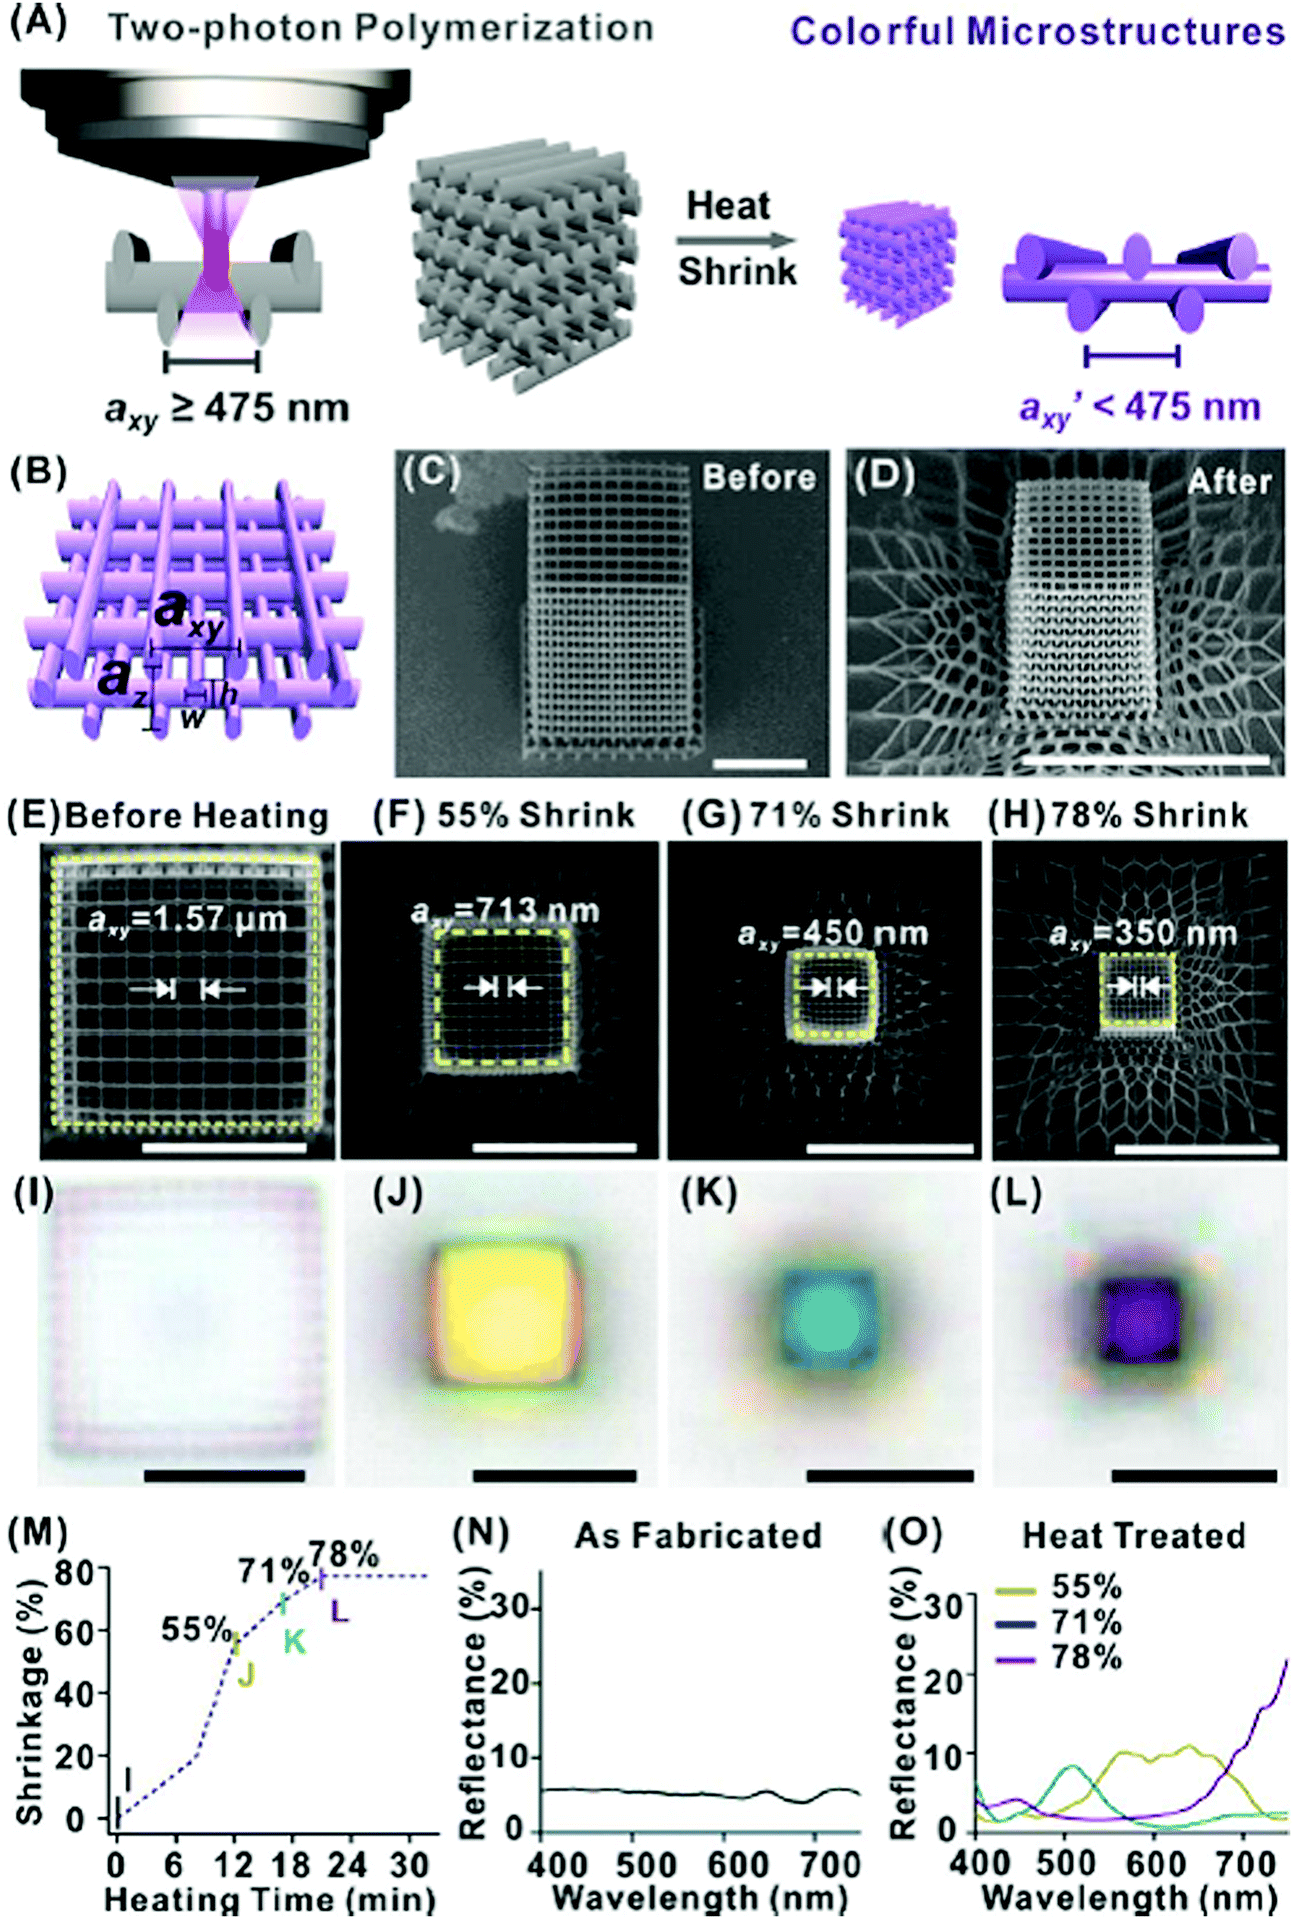 State Of Art Plasmonic Photonic Crystals Based On Self Assembled Nanostructures Journal Of Materials Chemistry C Rsc Publishing Doi 10 1039 D0tcj